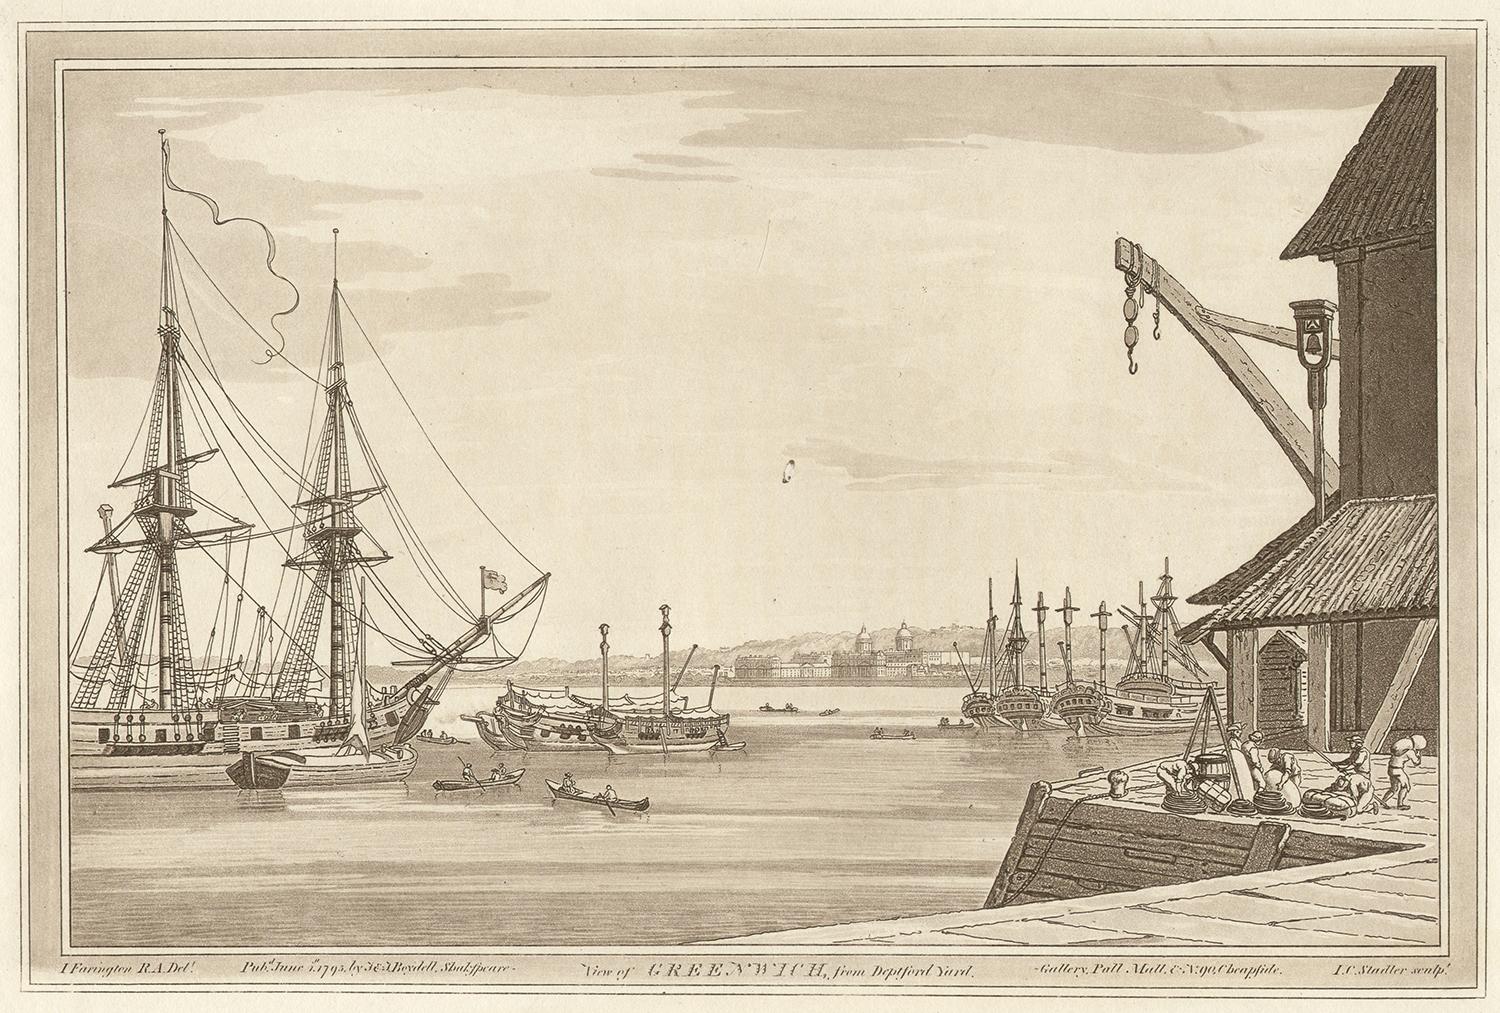 View of Greenwich from Deptford Yard, Thames, London, C18th English aquatint